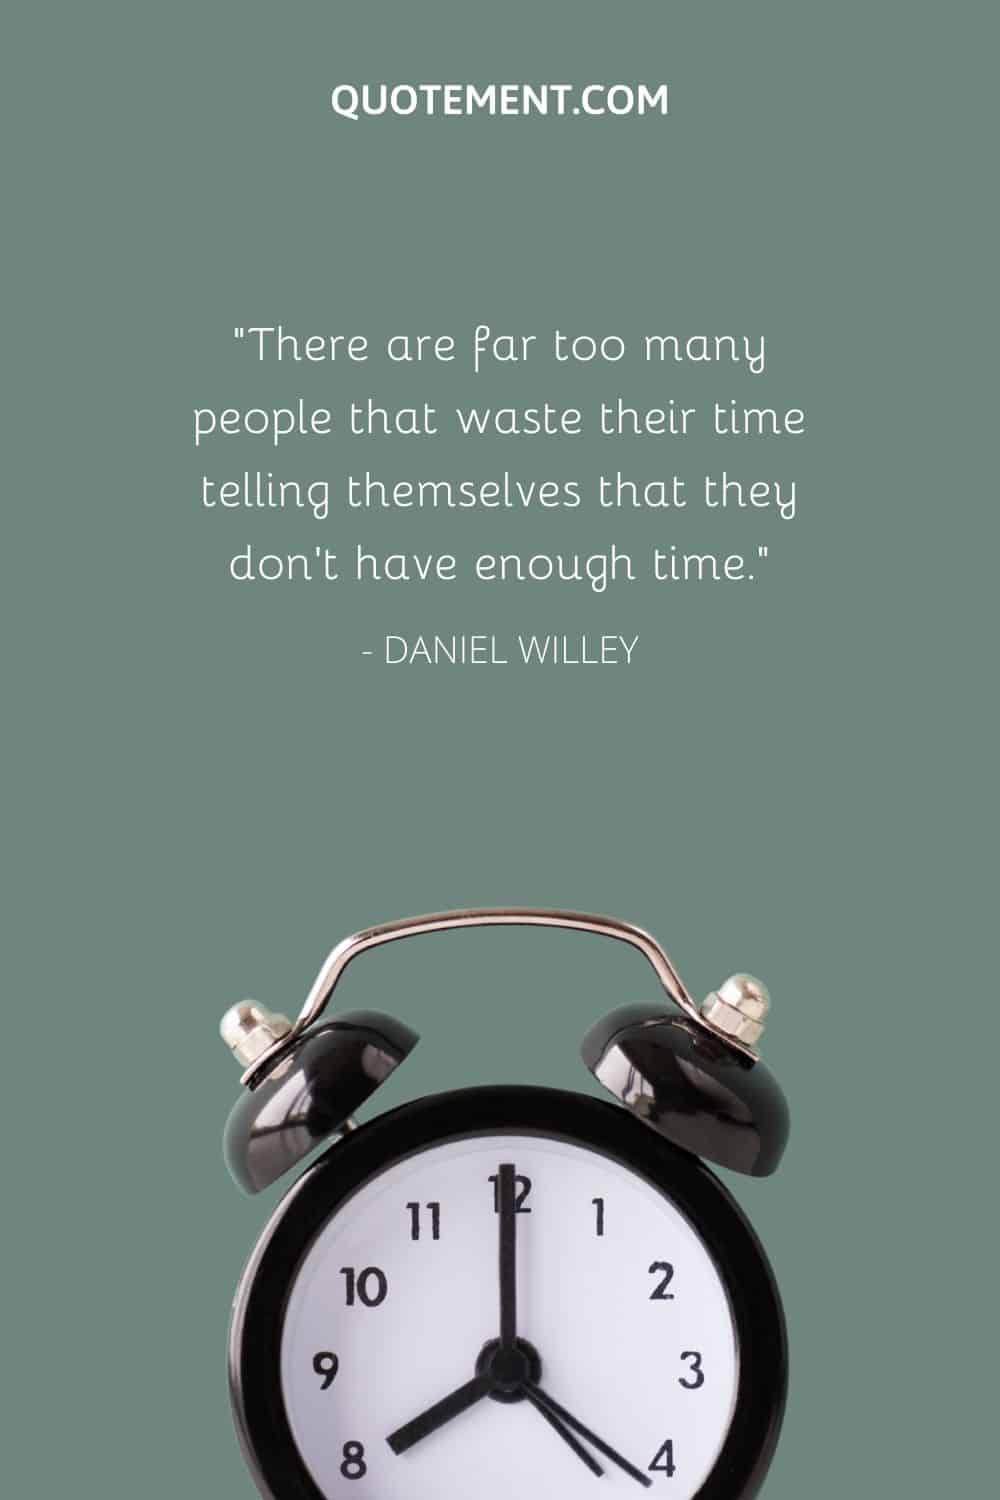 There are far too many people that waste their time telling themselves that they don’t have enough time